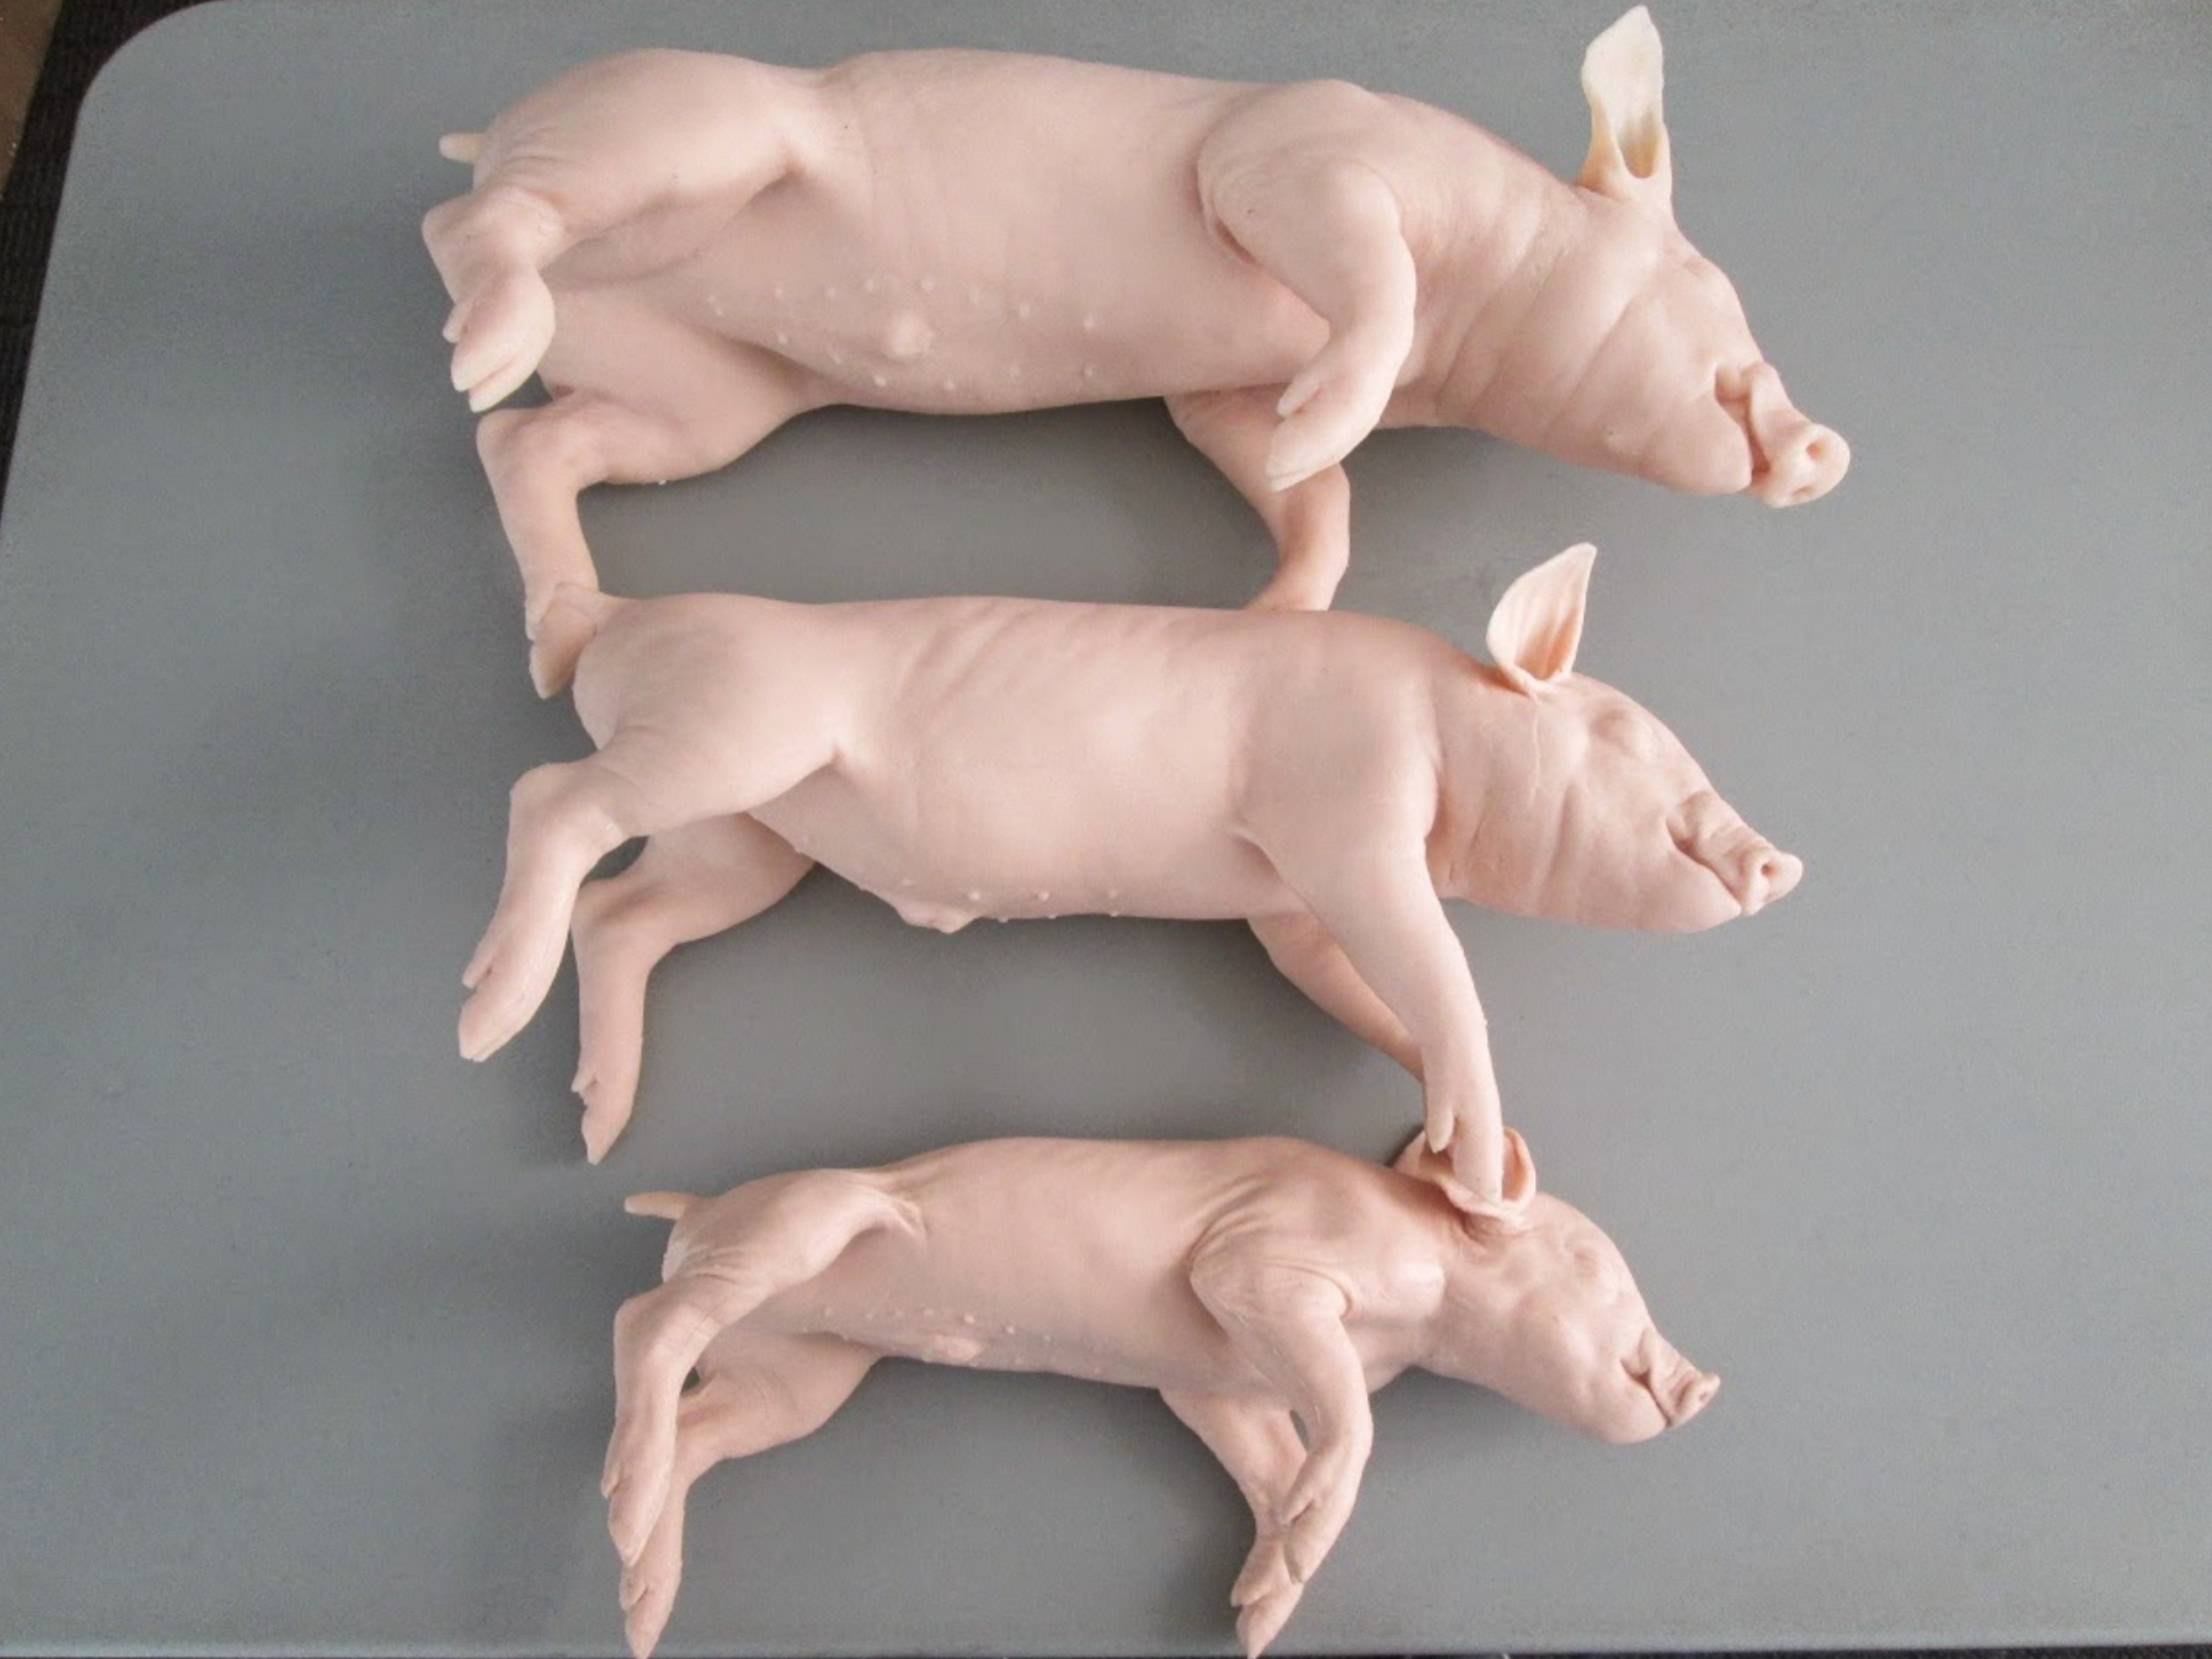  This image shows our “three little pigs” They are modeled from actual neonate piglets in three different sizes, 2-3 kg, 5-6 kg, and 7-8 kg. &nbsp;The piglets are for training non-penetrating captive bolt euthanasia. &nbsp;They are rubber with a foam